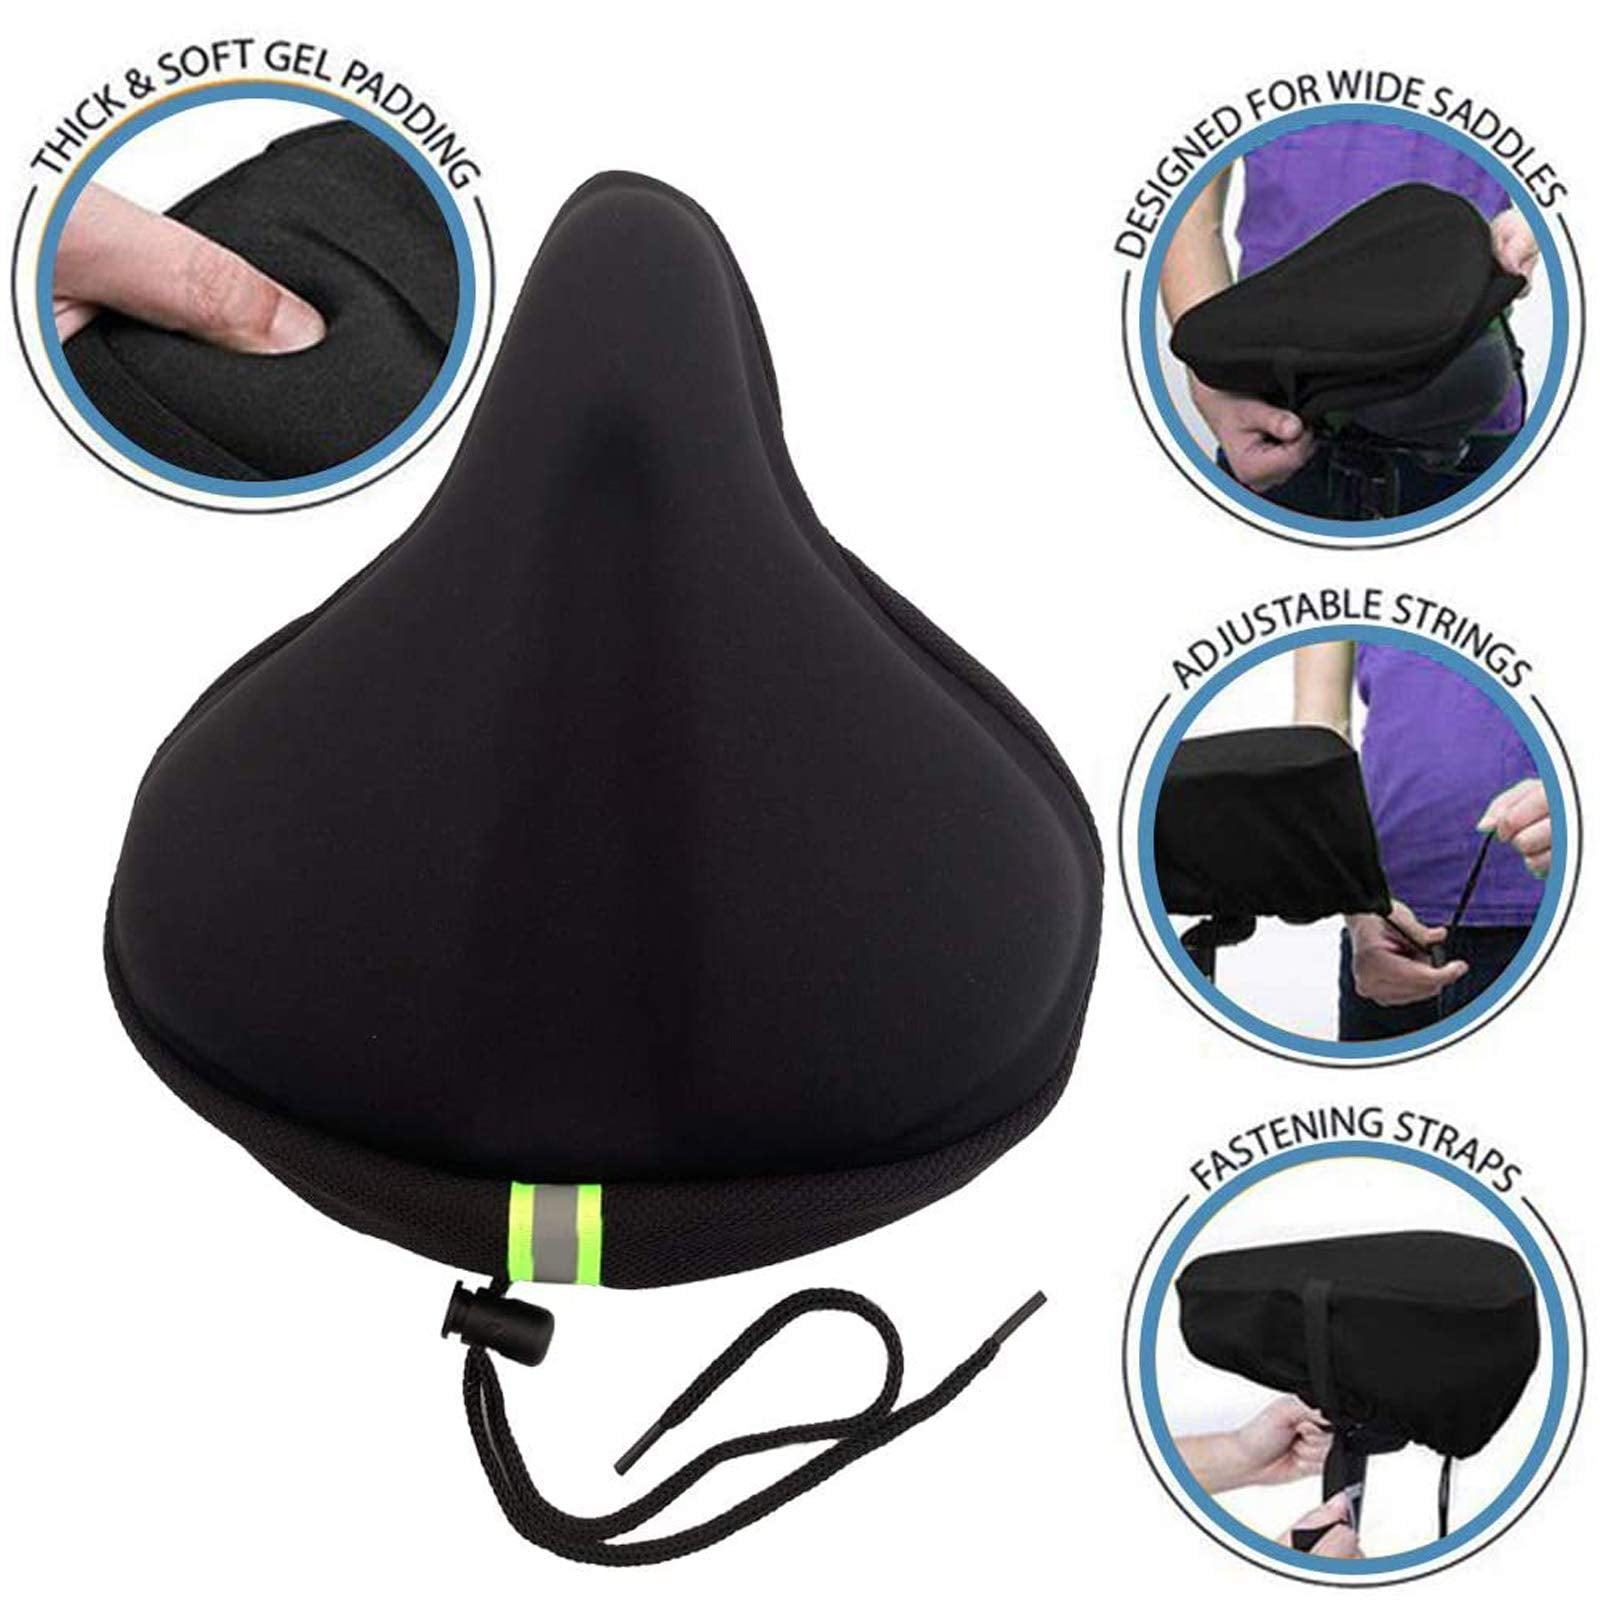 Big Softy Gel Bike Seat Cover - Super soft and comfortable